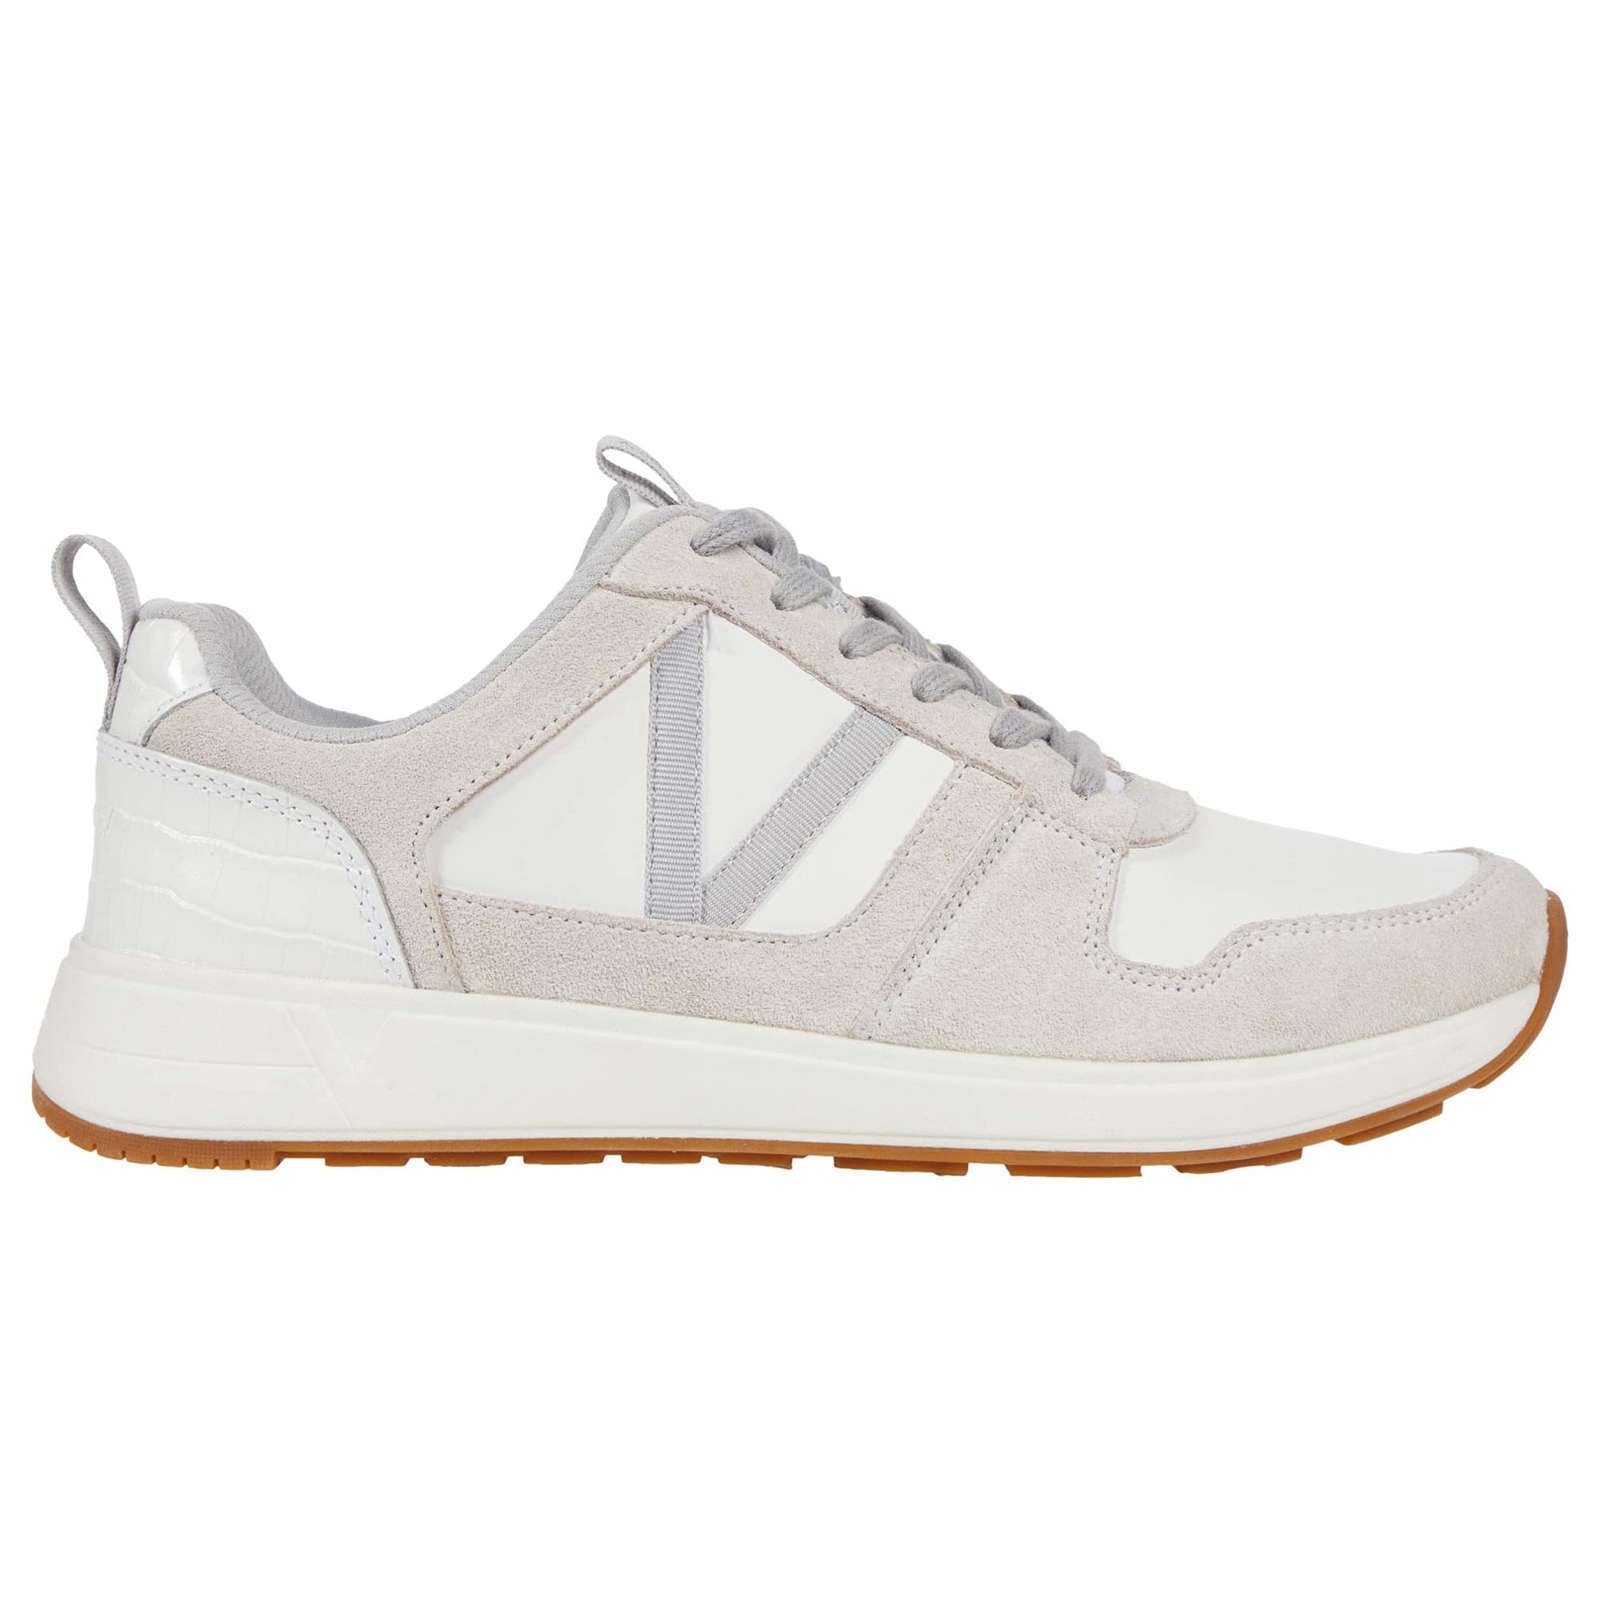 Vionic Curran Rechelle Leather Suede Womens Trainers#color_white